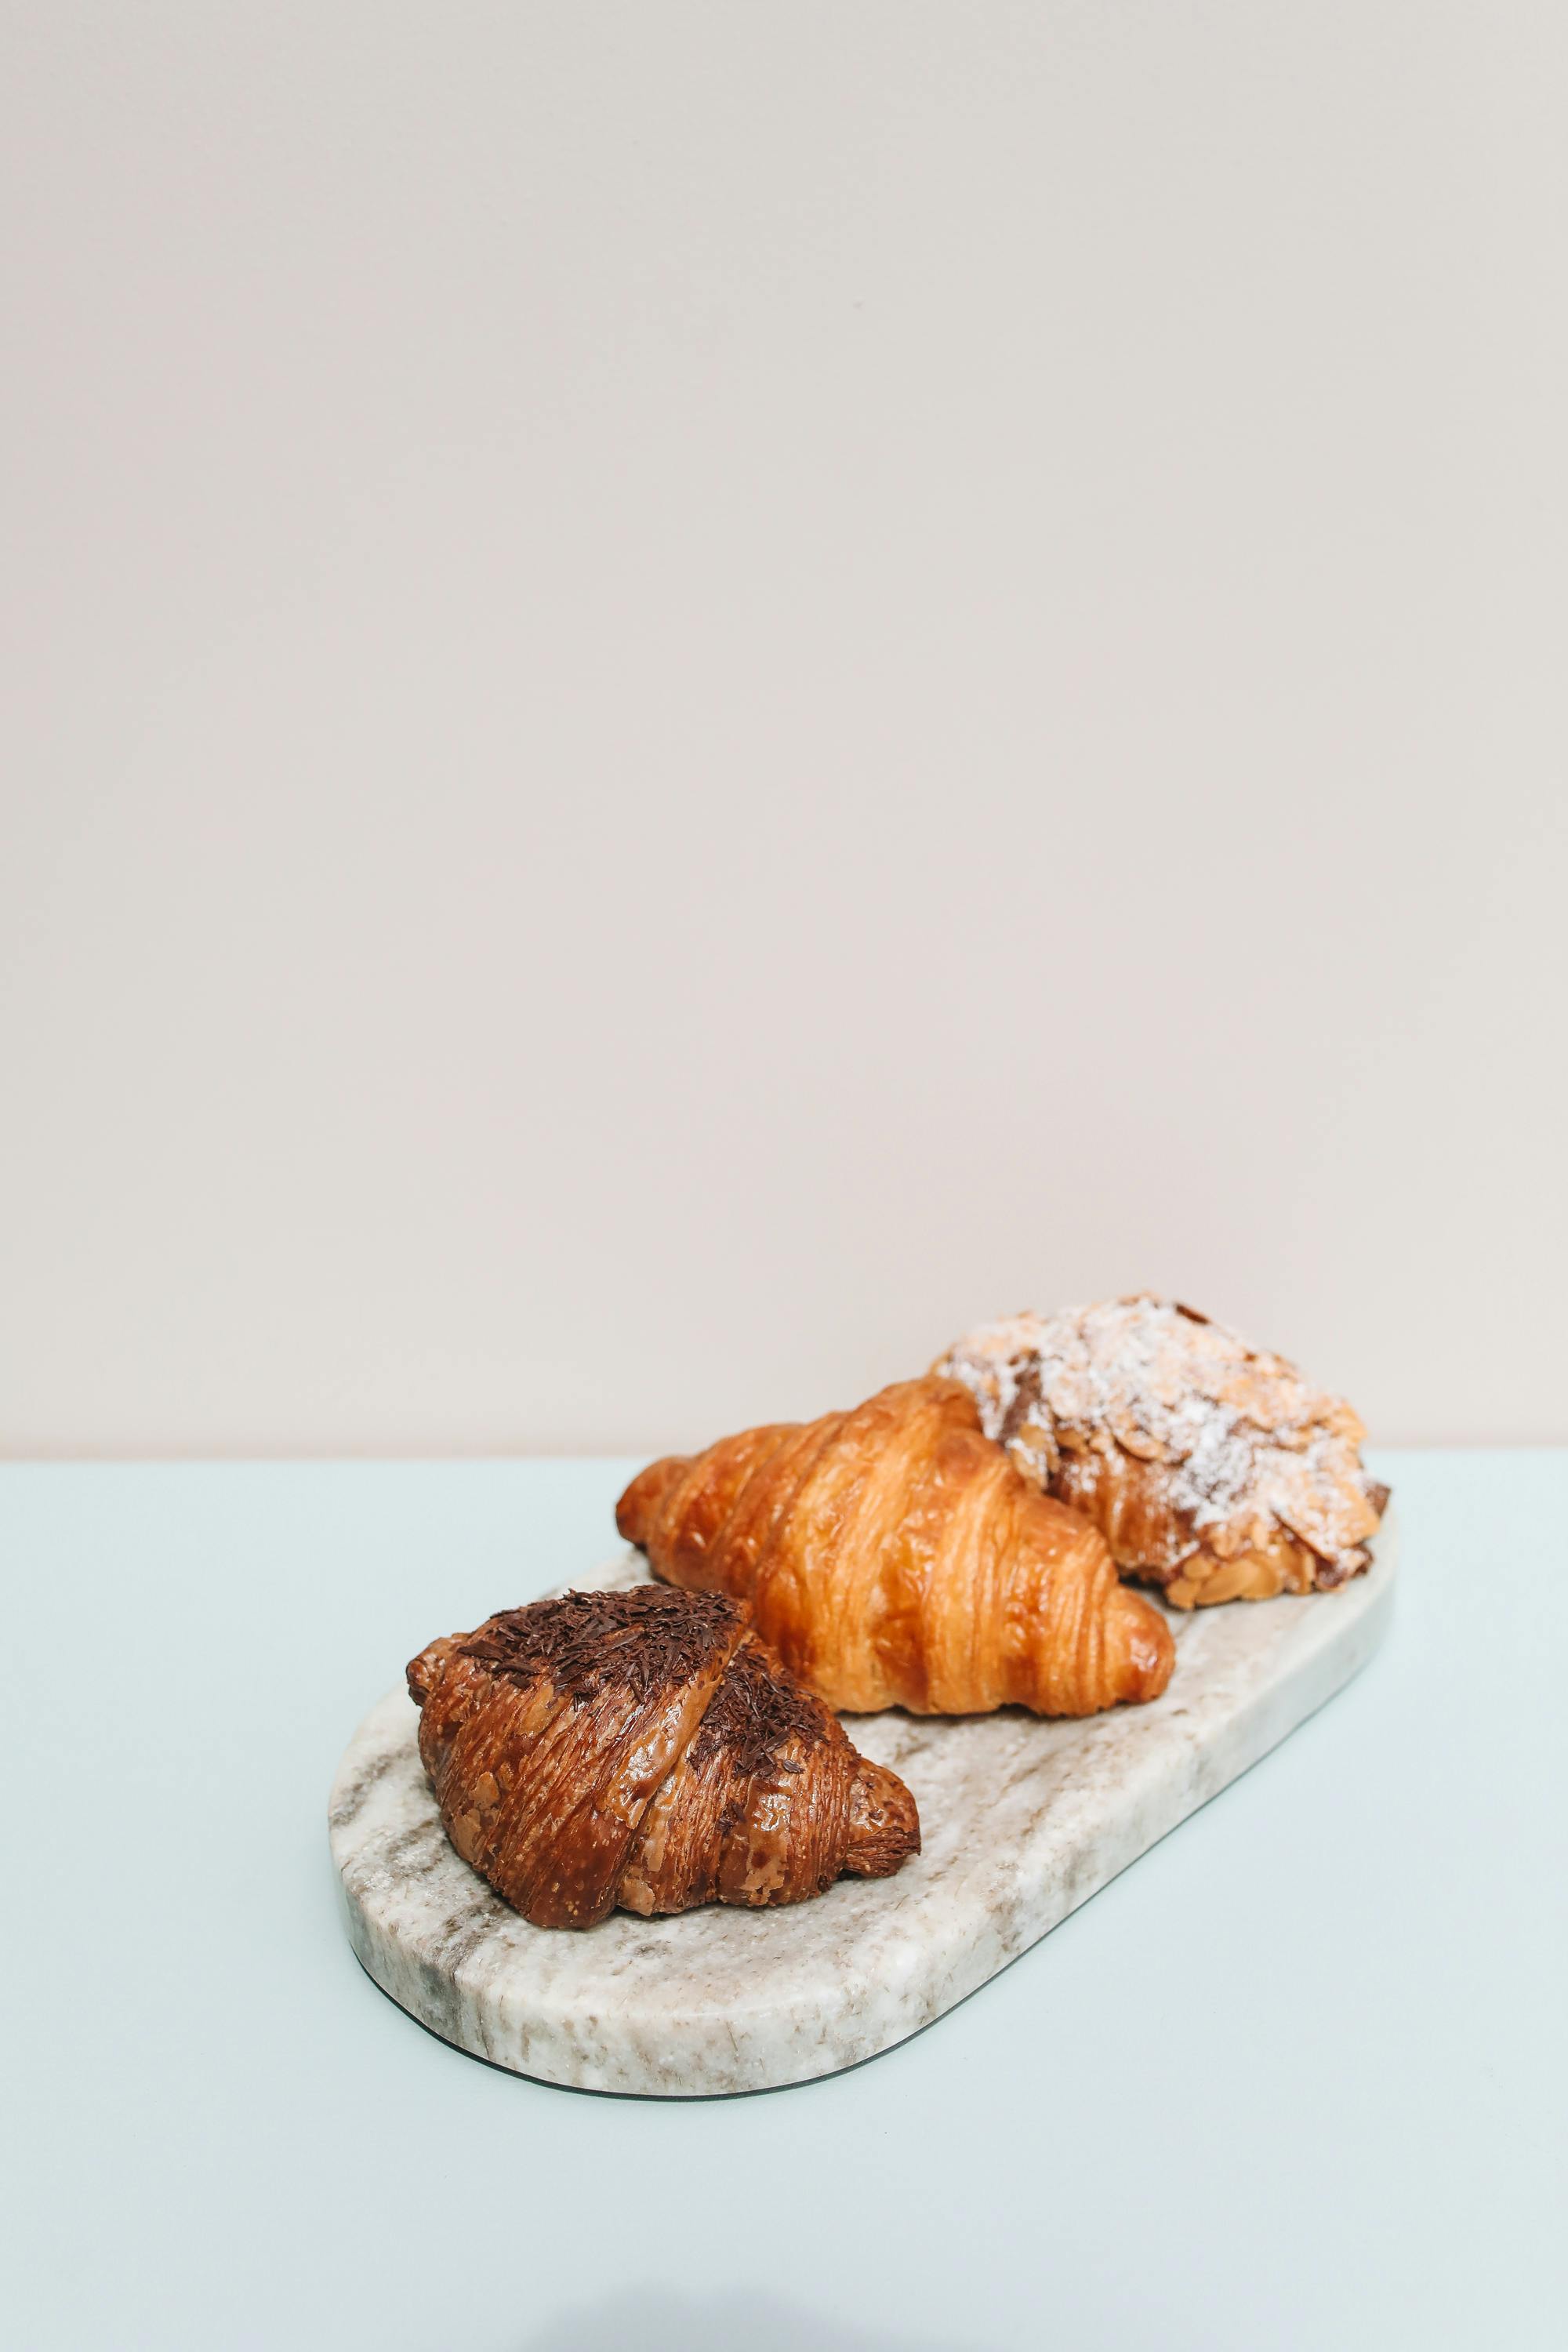 French Baking Techniques For Croissants